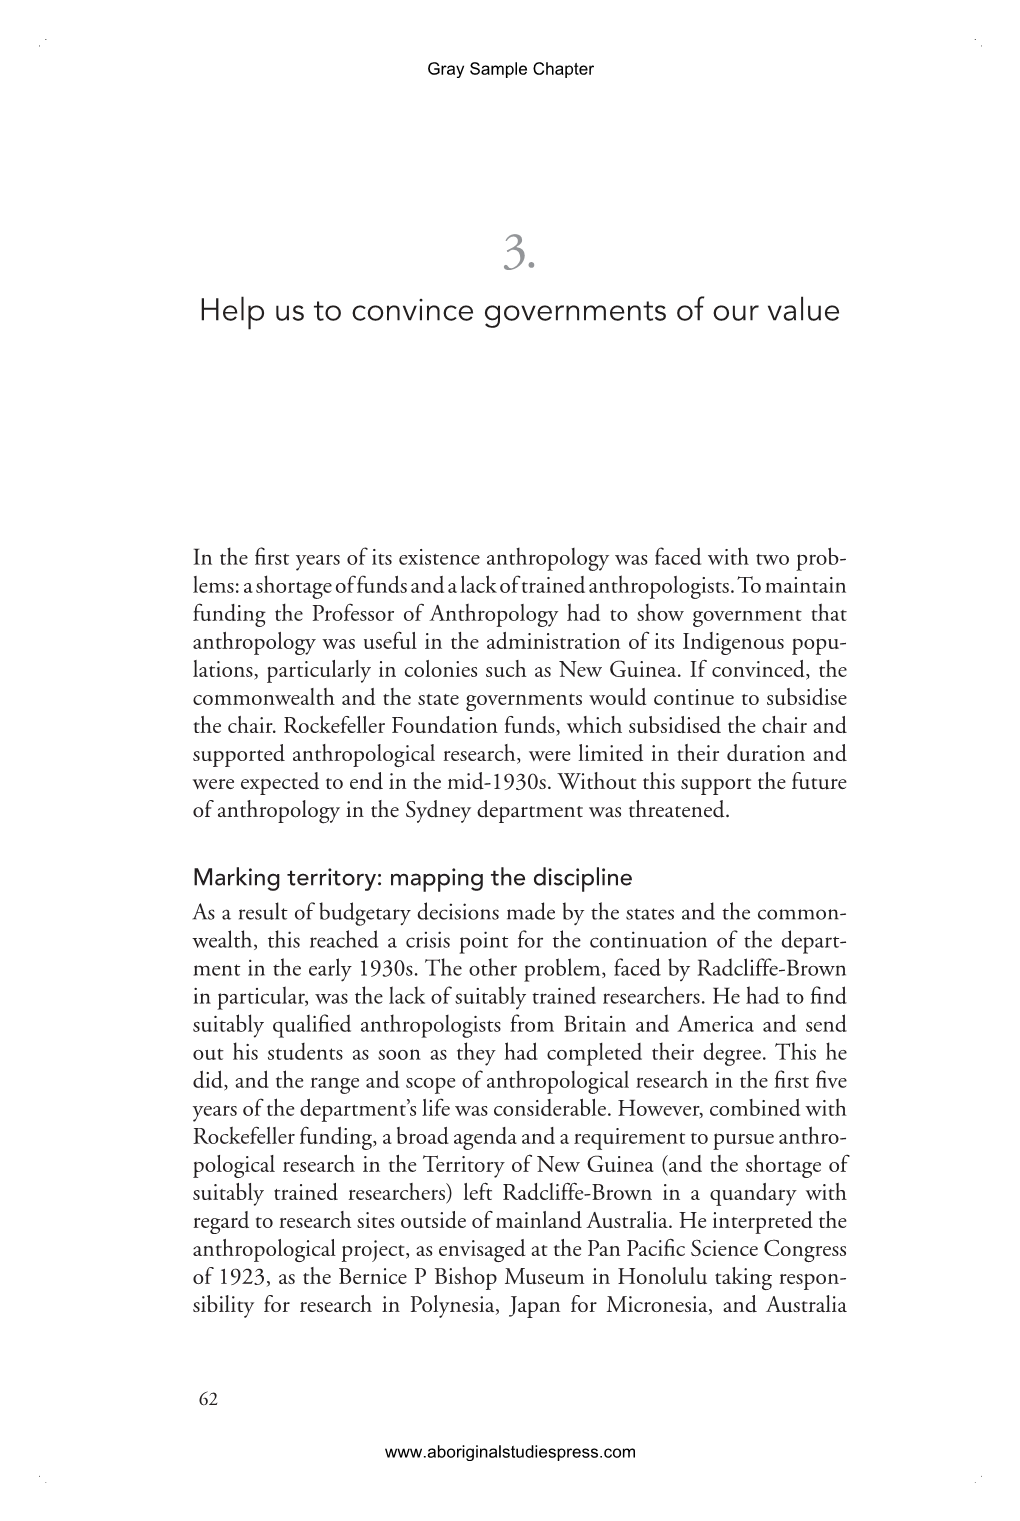 Help Us to Convince Governments of Our Value